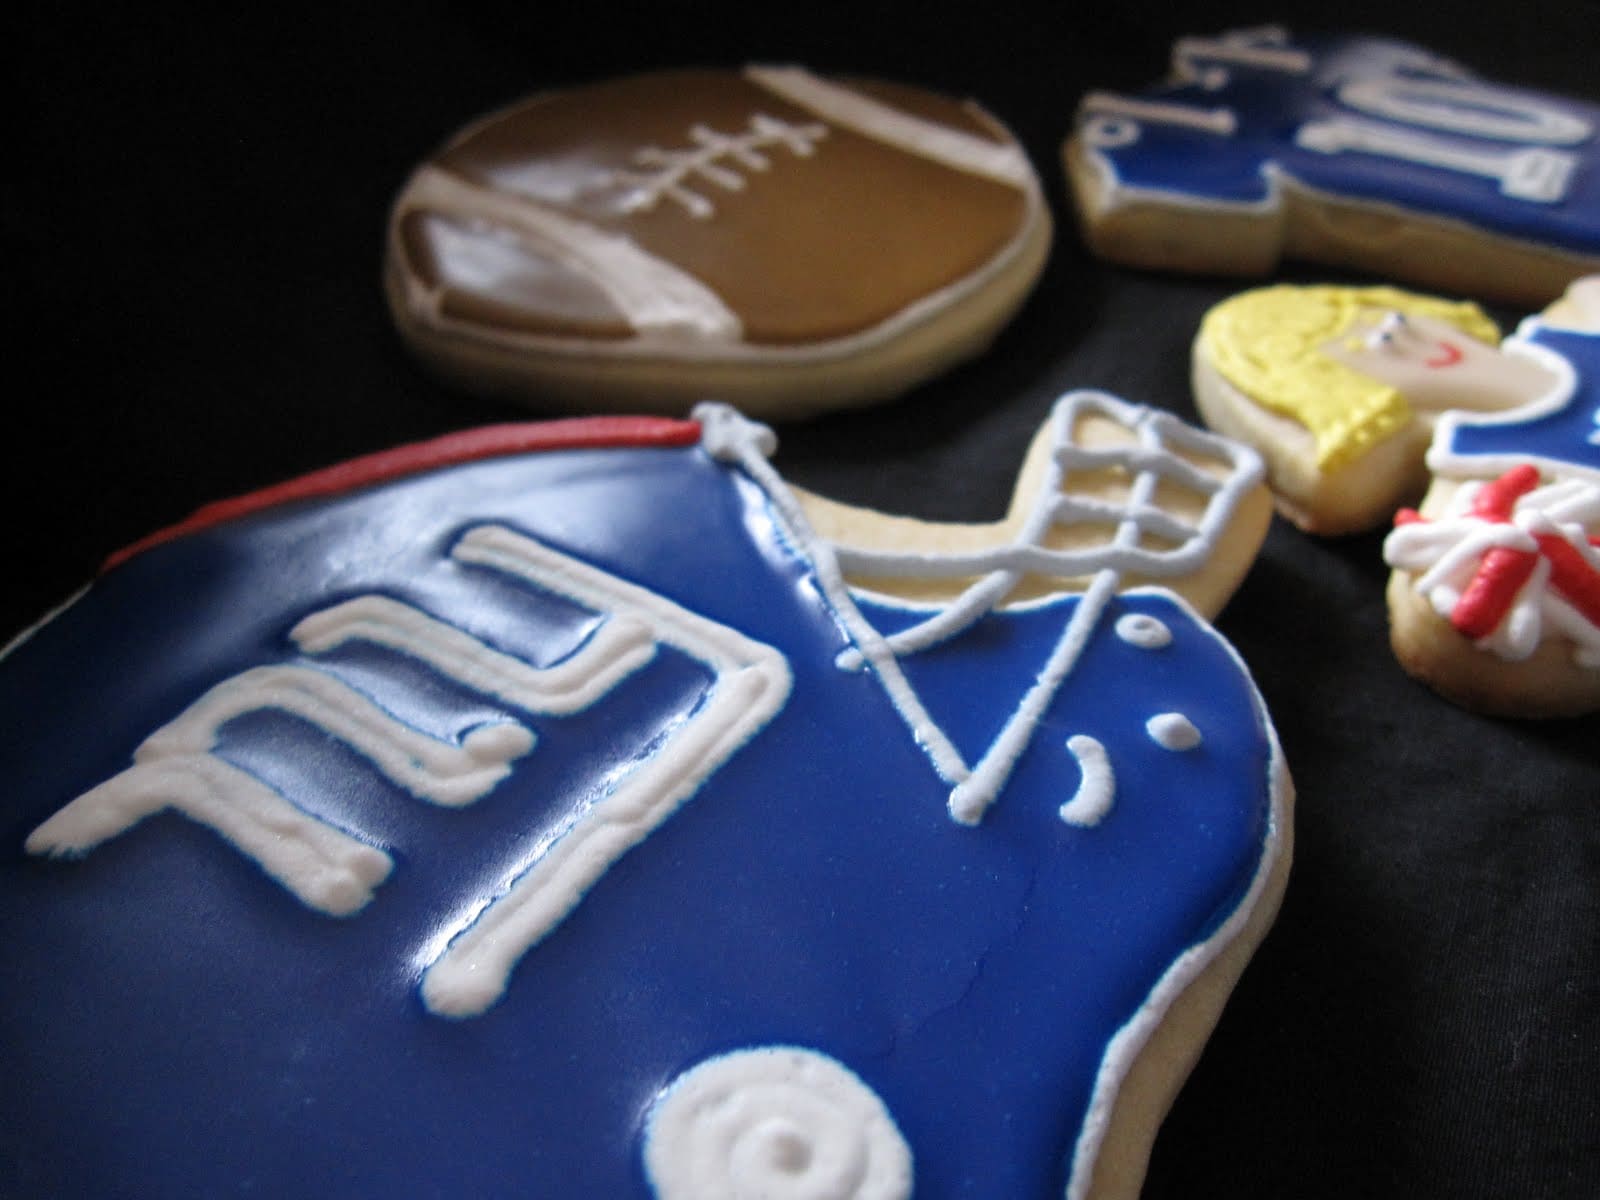 NY Giants themed cookies with helmet, football, jersey and cheerleader